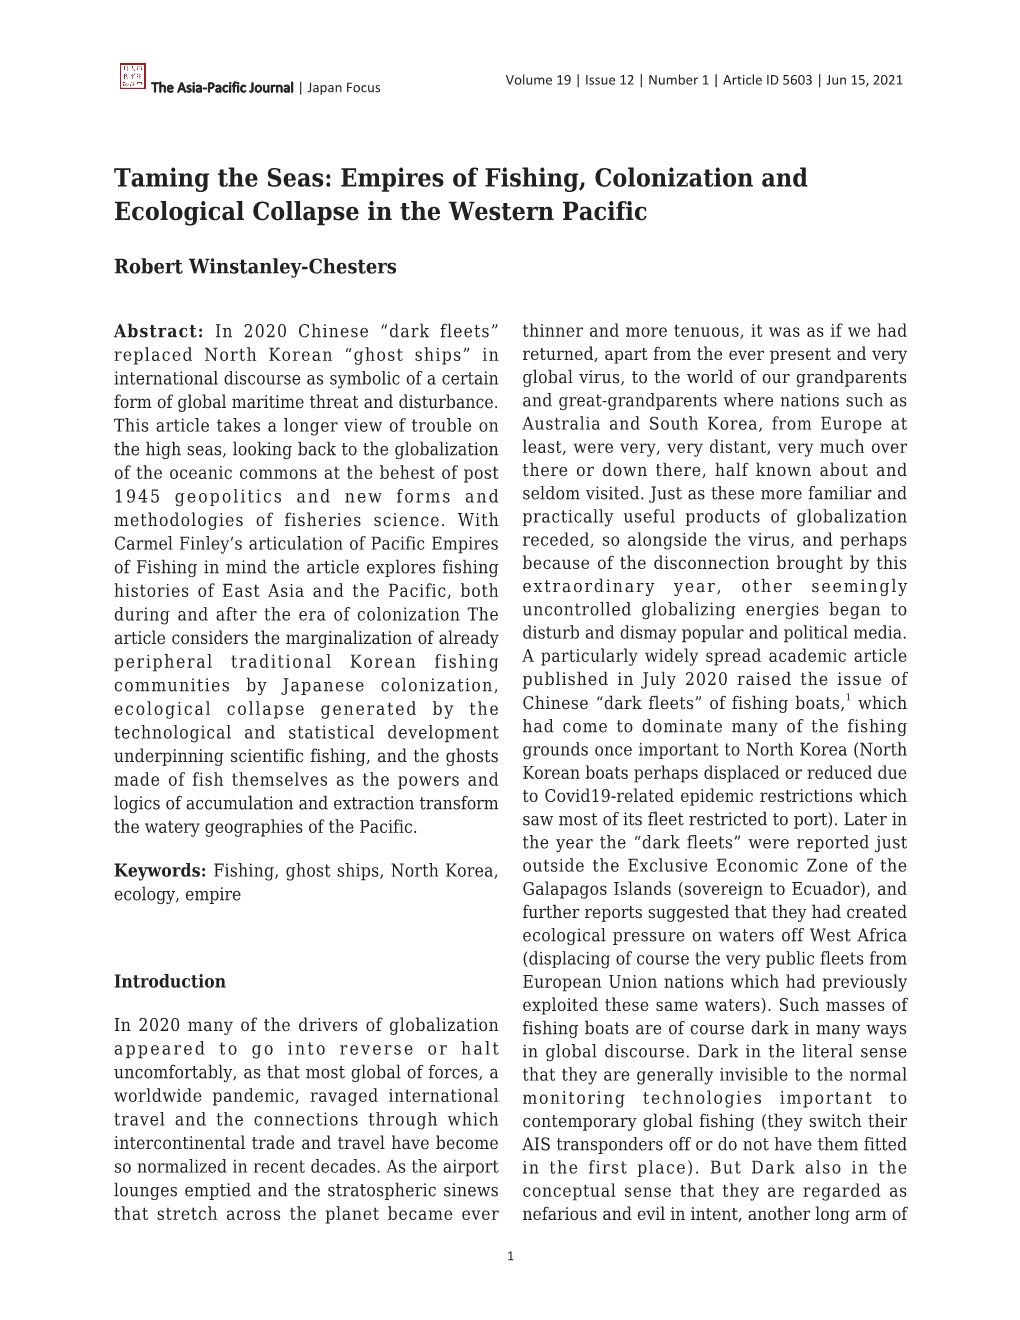 Empires of Fishing, Colonization and Ecological Collapse in the Western Pacific